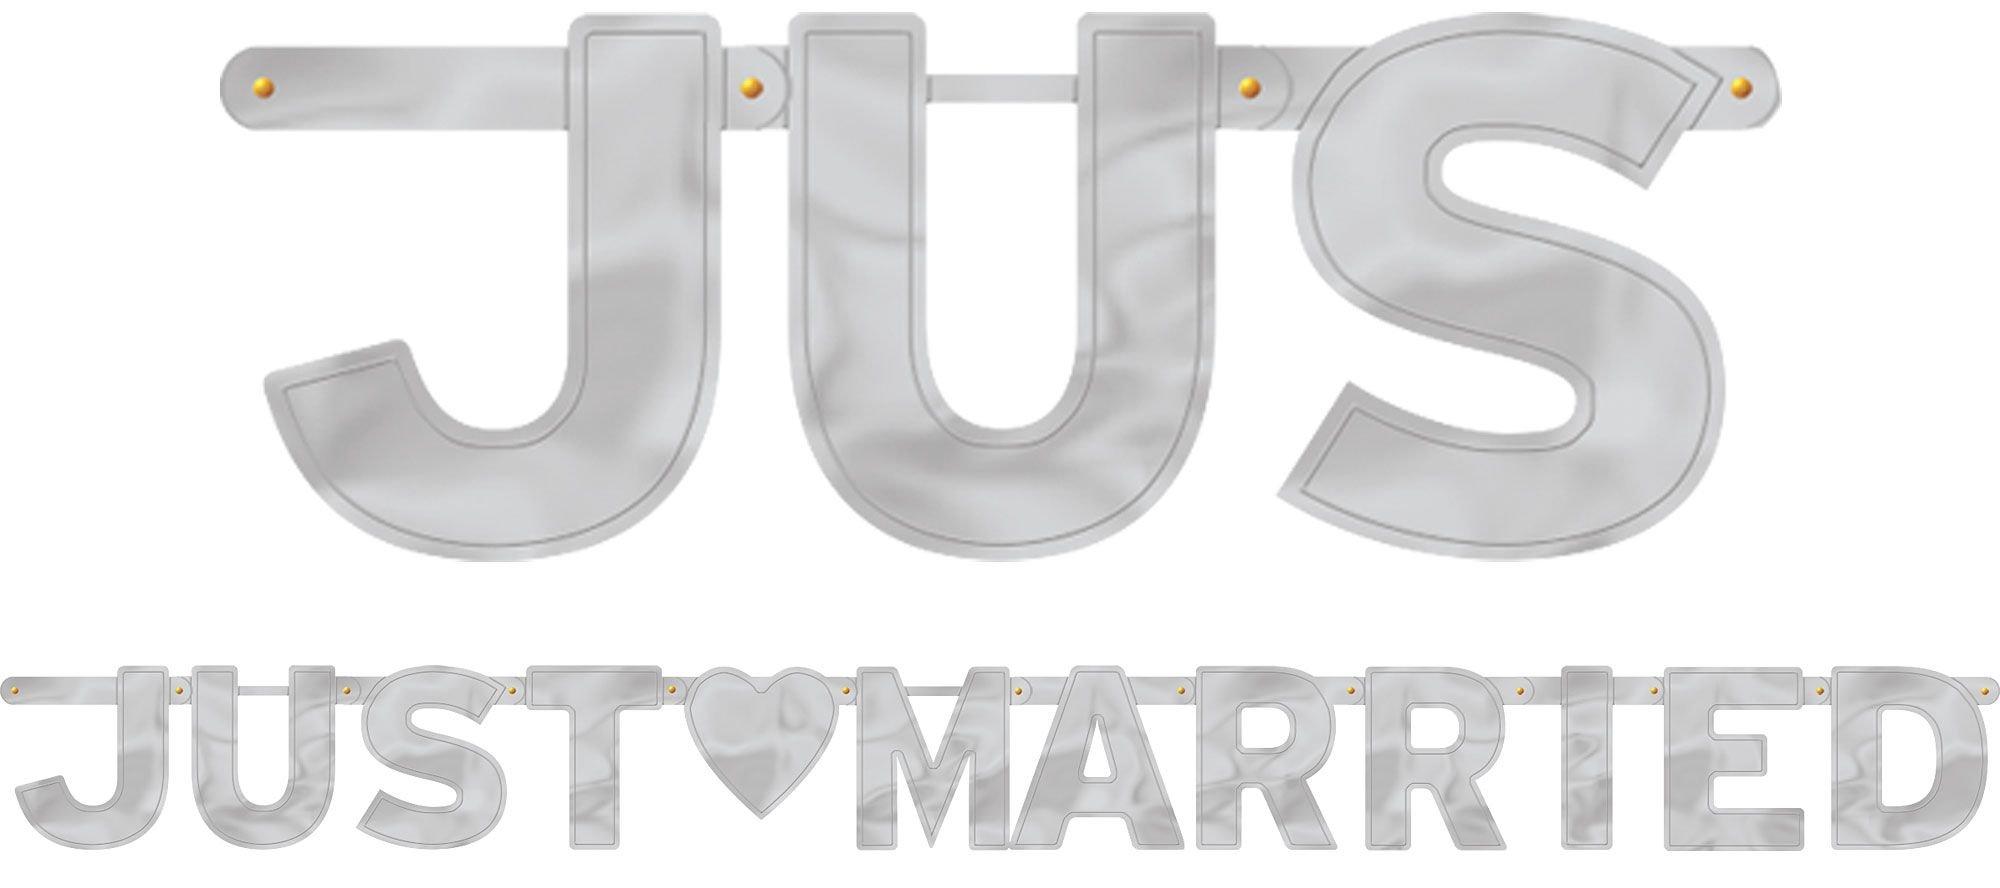 Silver Just Married Letter Banner